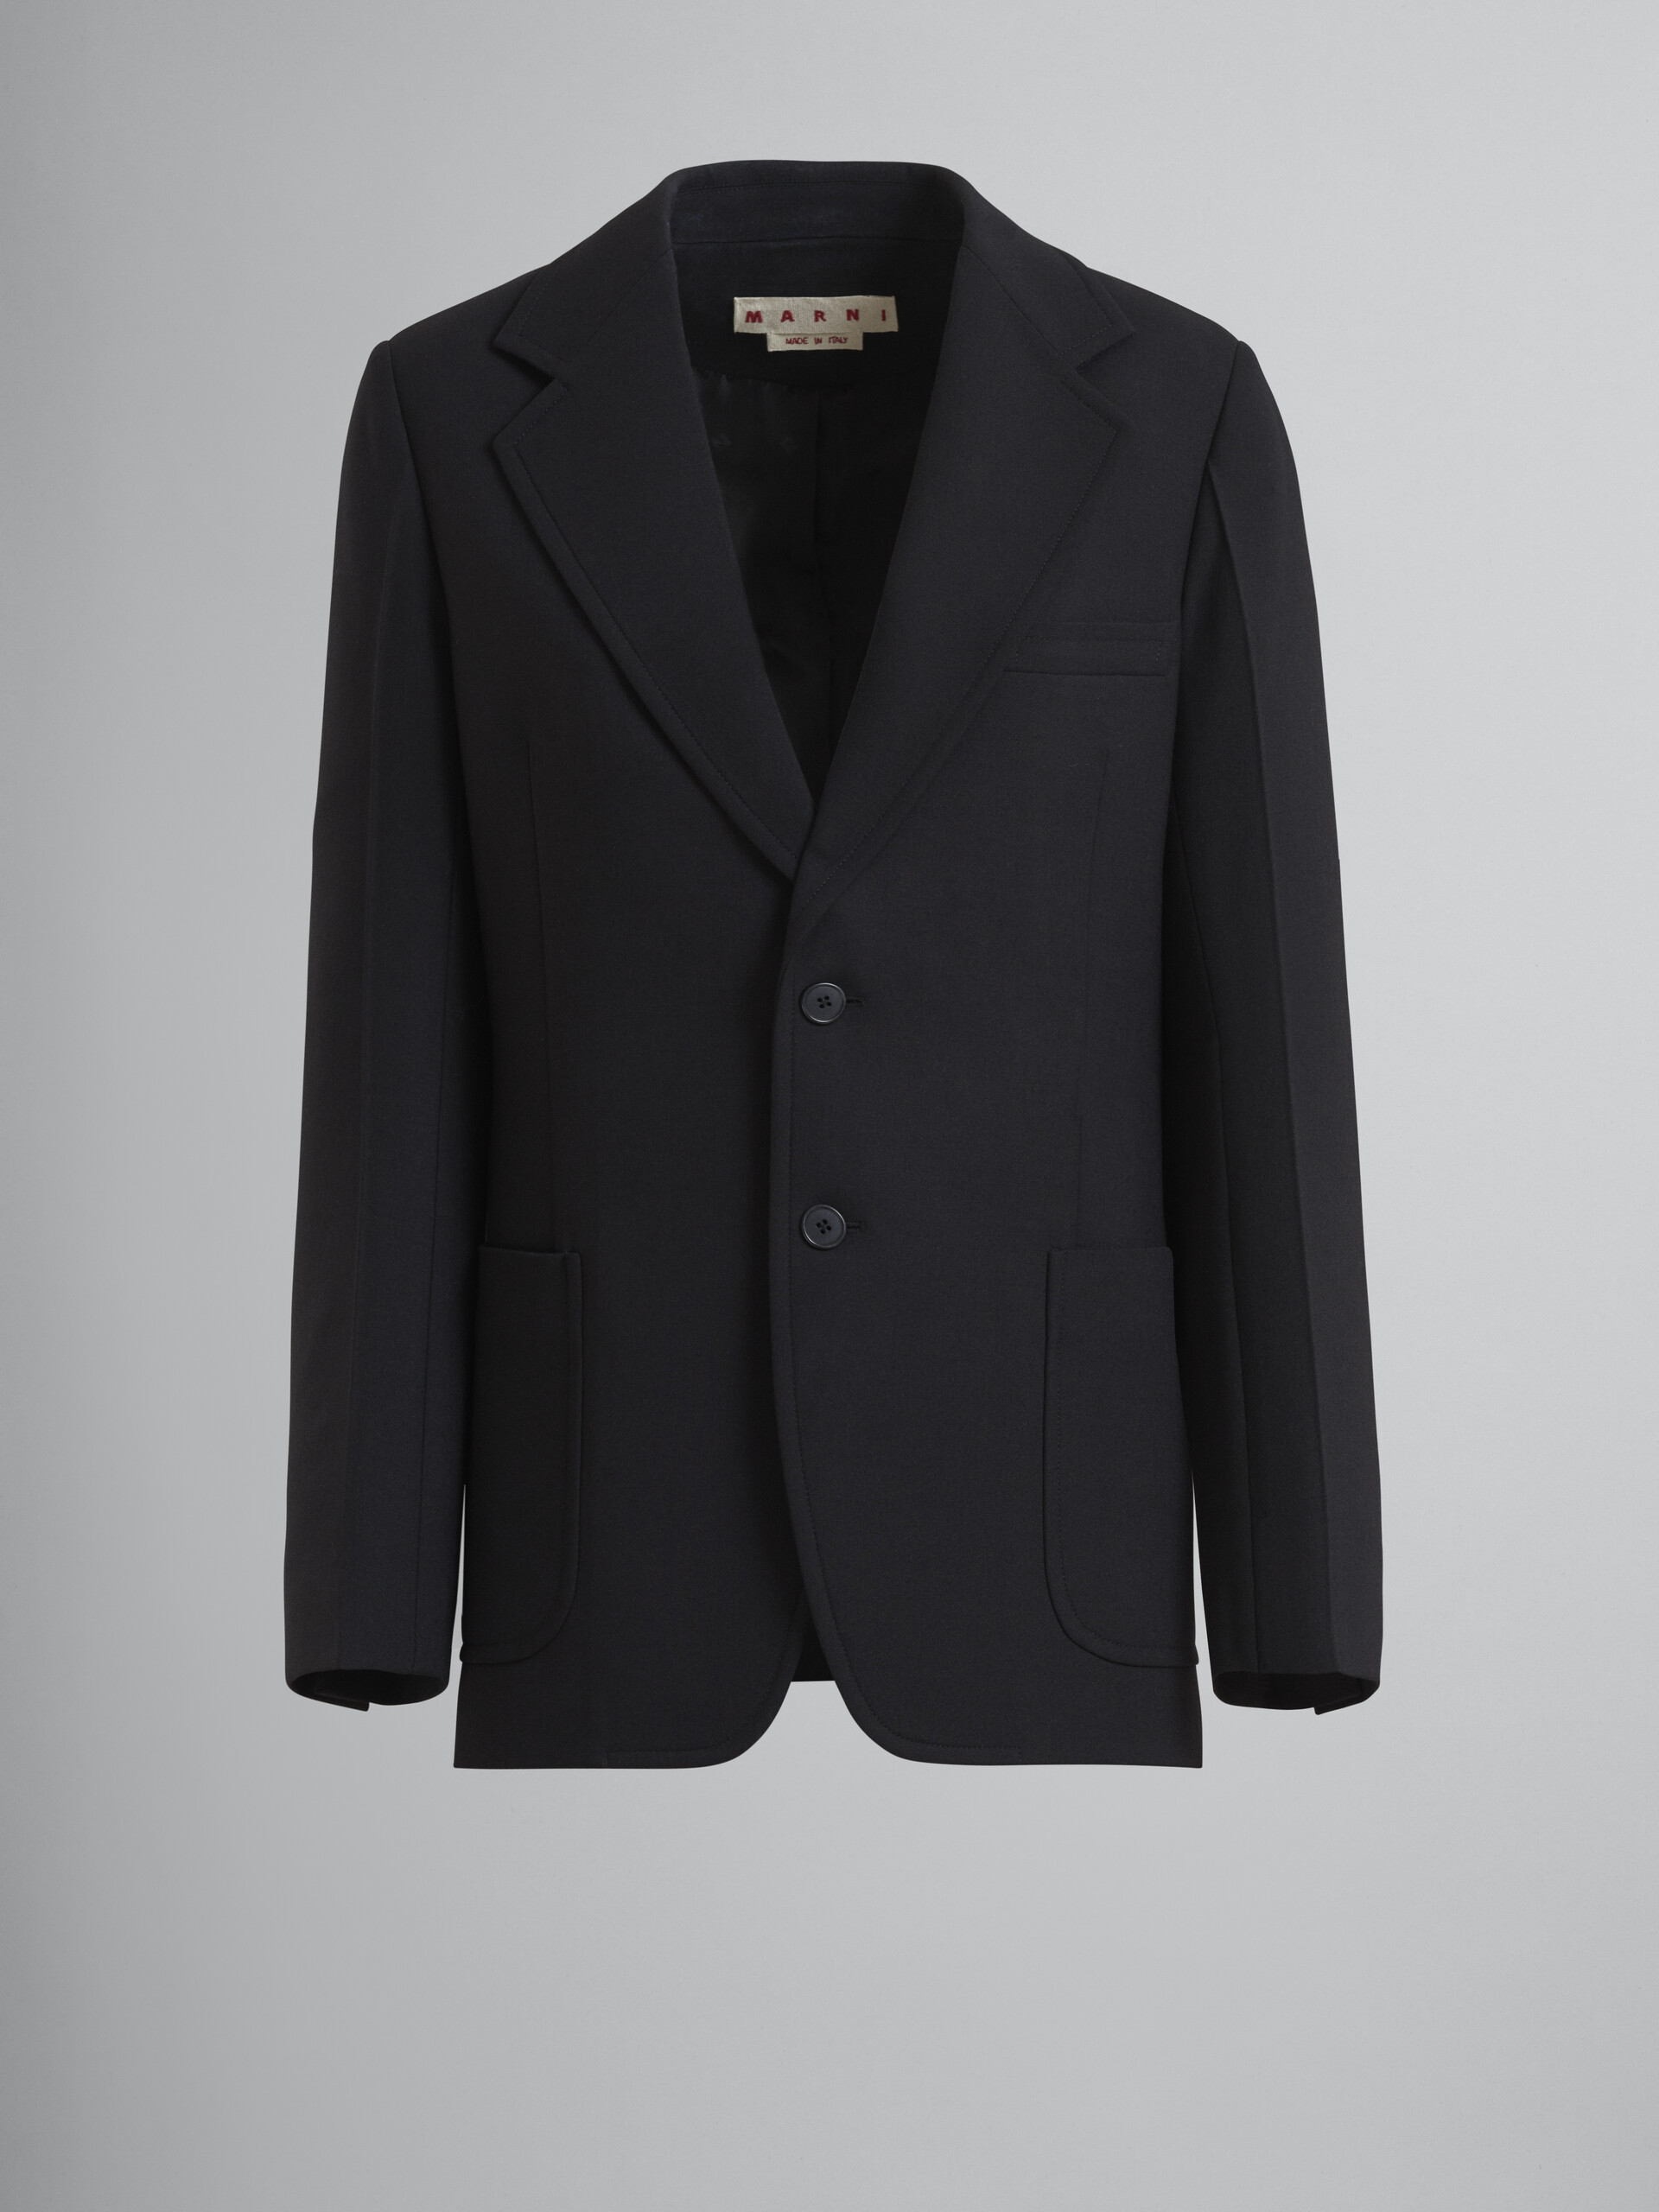 Crepe double wool jacket with lapel collar - Jackets - Image 1